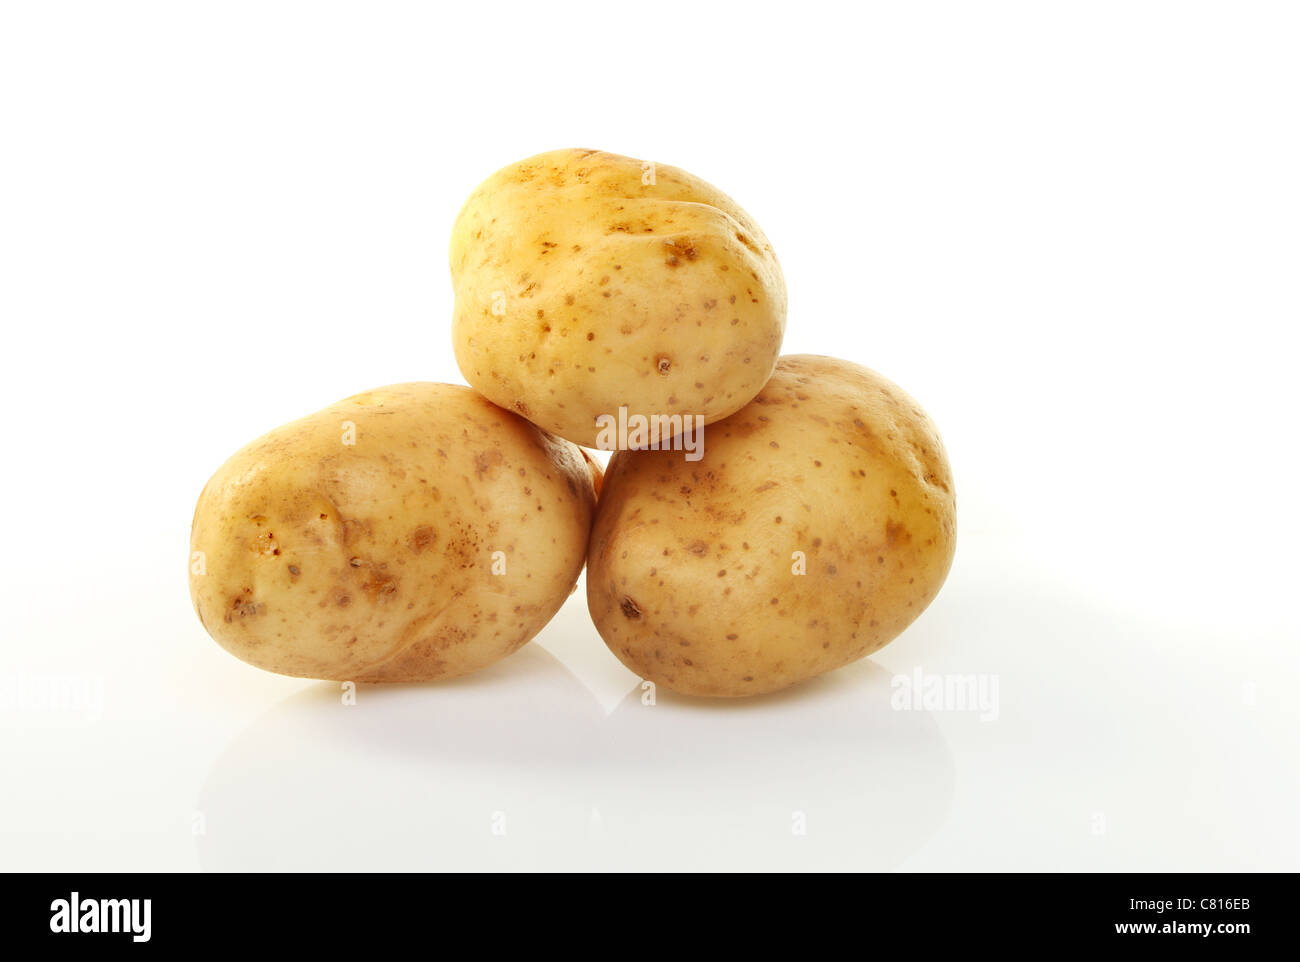 Stack of three washed new potatoes with soft shadows against a white background Stock Photo